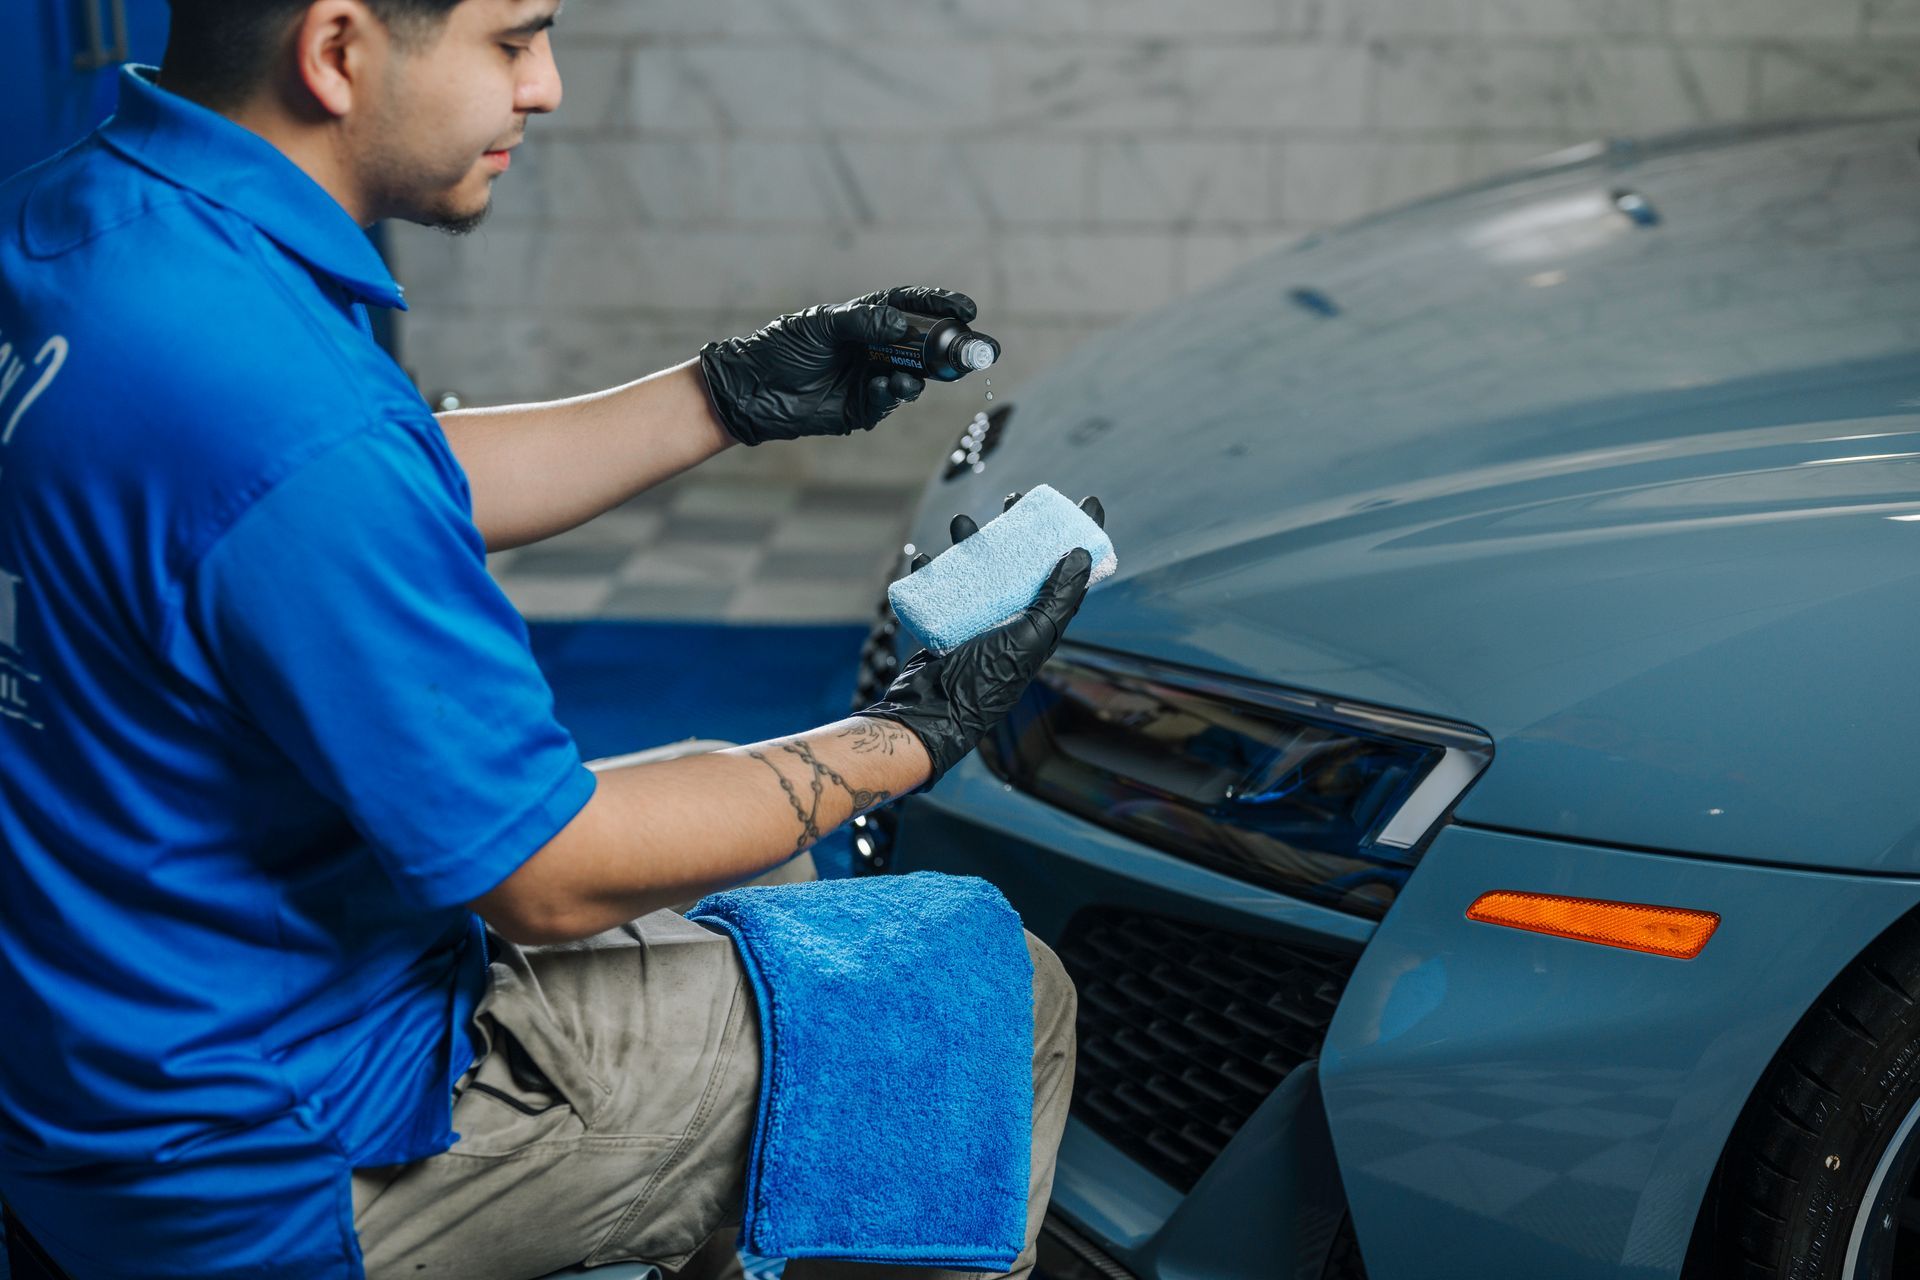 A man in a blue shirt is cleaning a car with a sponge.